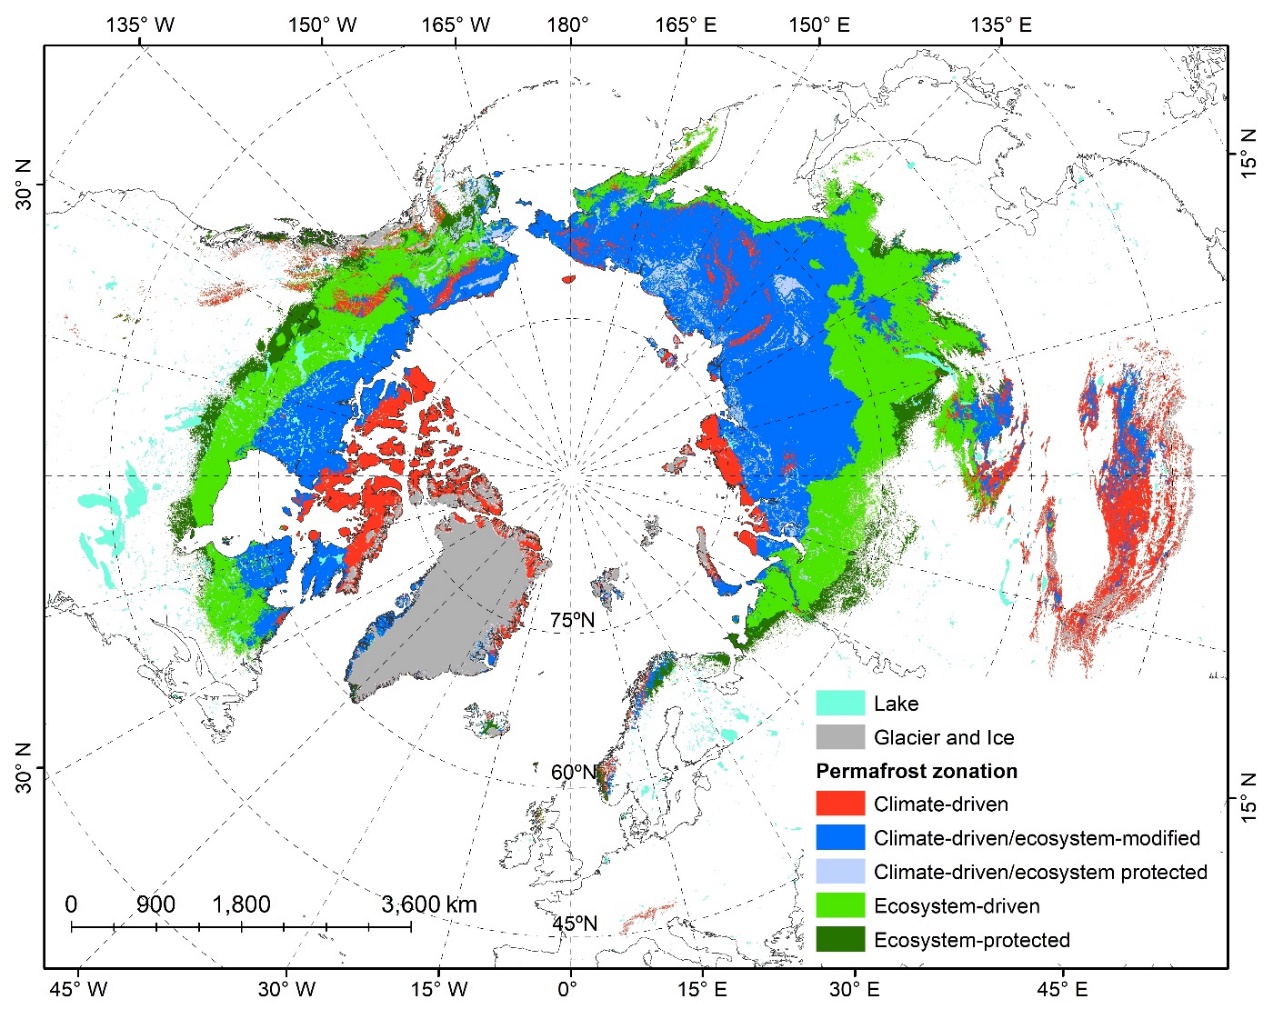 Biophysical permafrost zones in the Northern Hemisphere based on climate and ecosystem drivers.jpg